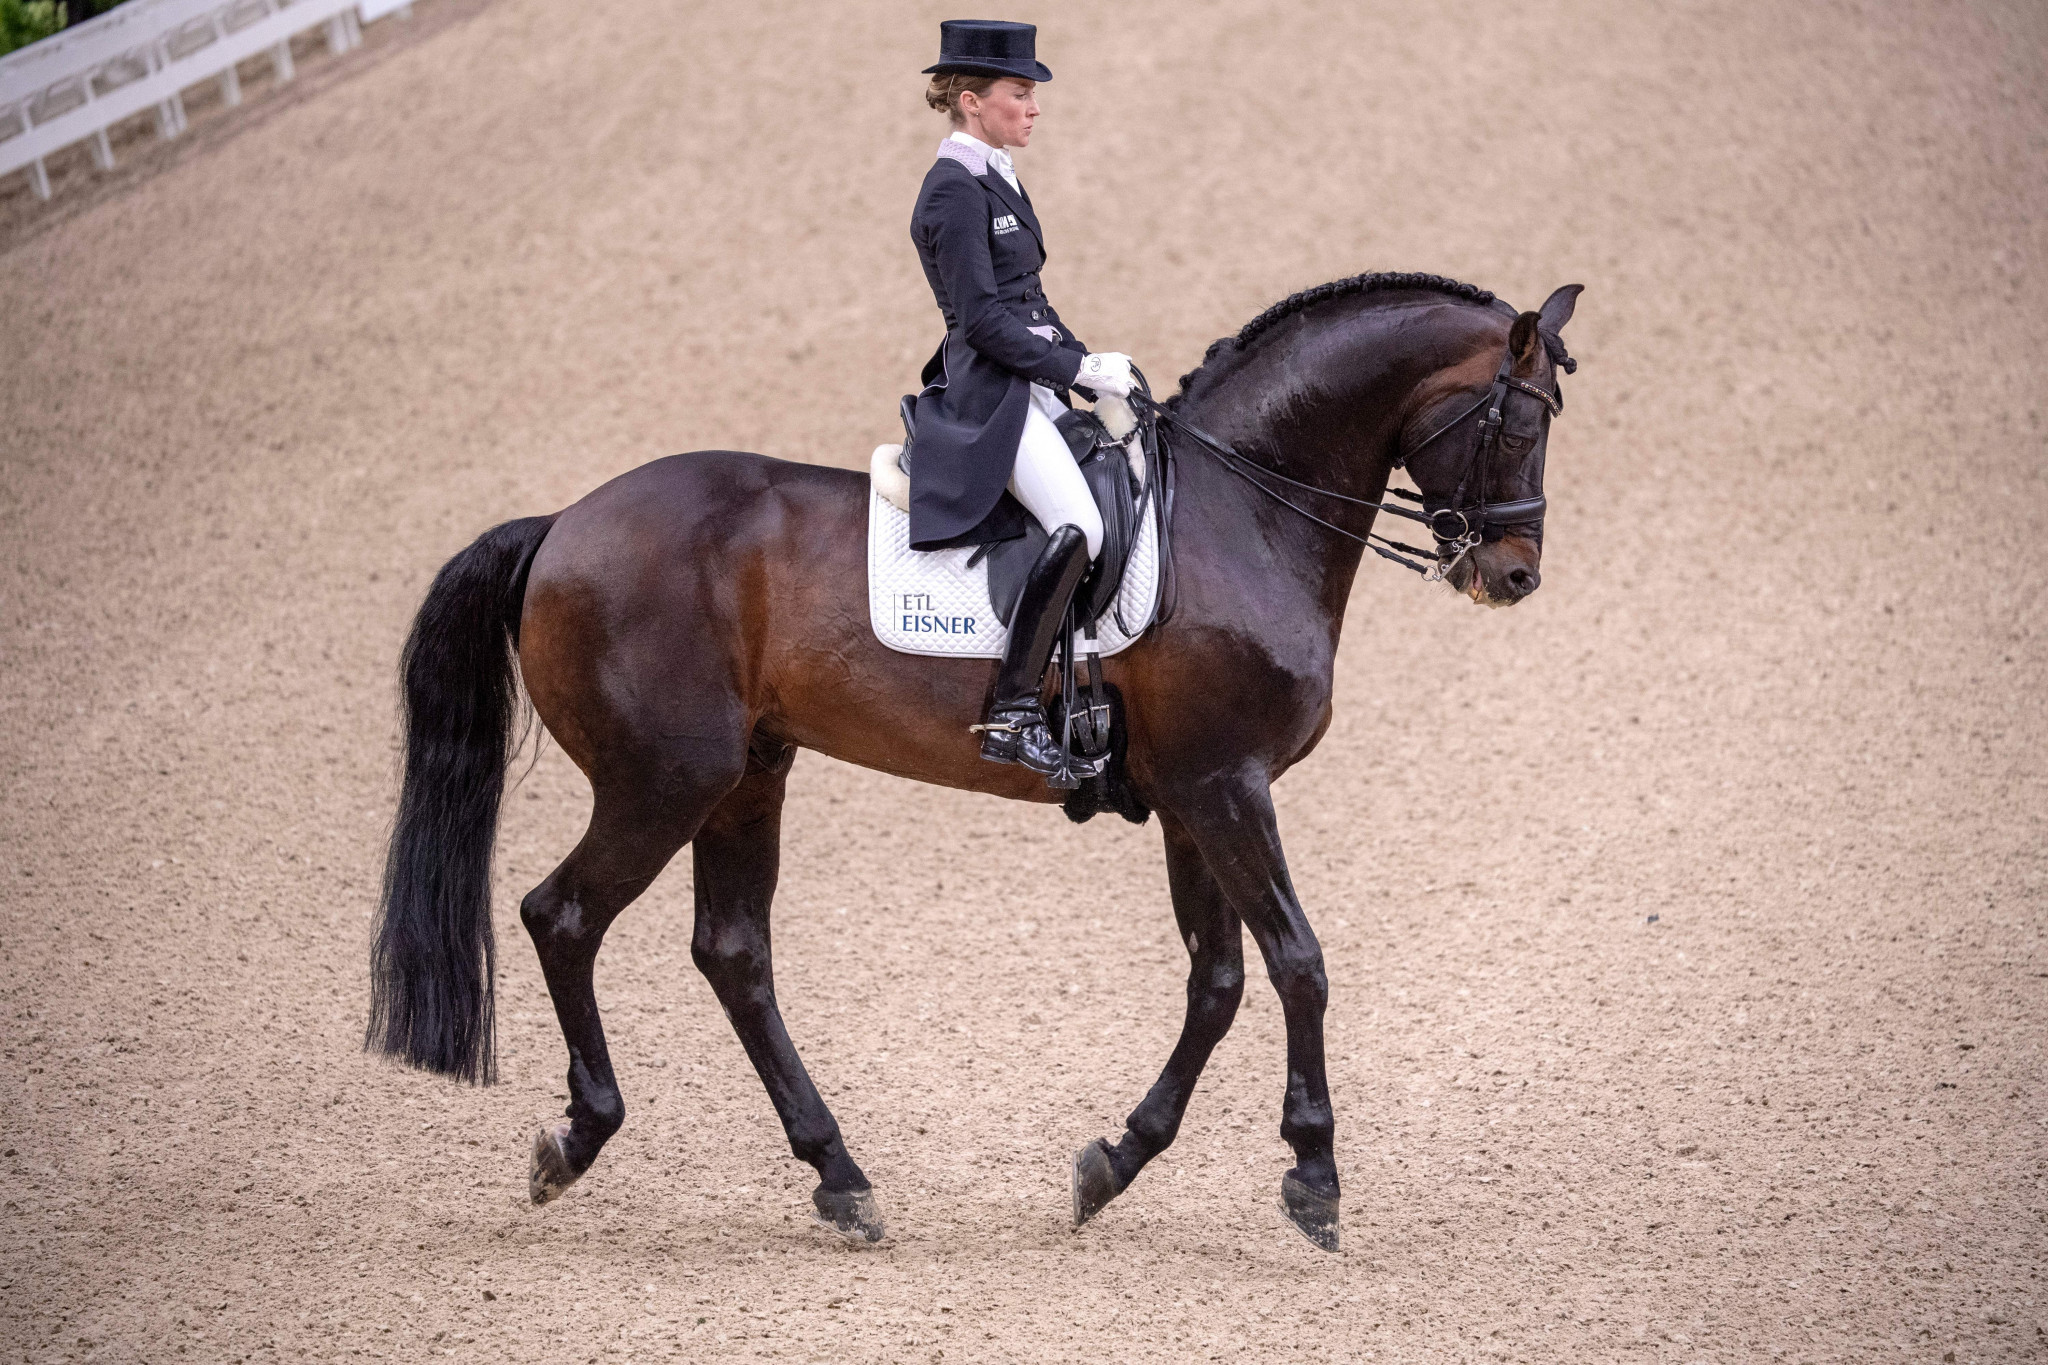  Compiègne prepares to host second round of FEI Dressage Nations Cup 